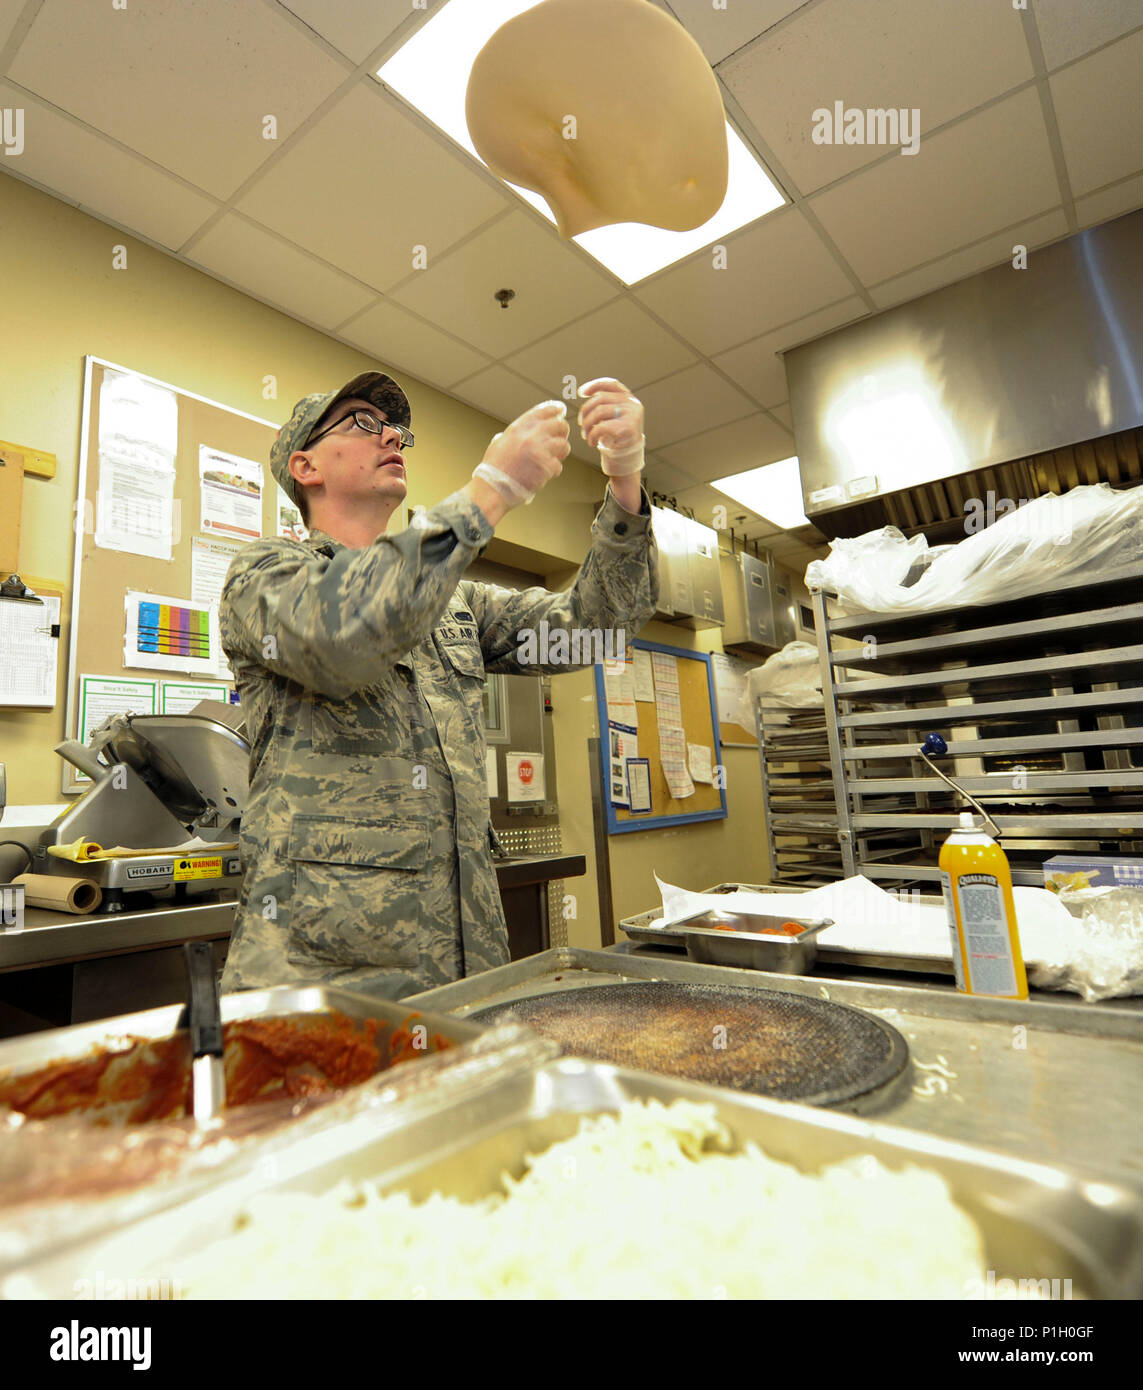 Senior Airman Boyd Cox, a food service journeyman assigned to the 28th Force Support Squadron tosses pizza dough in the air to prepare for the lunch rush at Ellsworth Air Force Base, S.D., Oct. 6, 2016. The Raider Café, Ellsworth’s dining facility, was recently nominated for the coveted John L. Hennessy award at the major command level, and will soon compete at the Air Force level within the next month. Stock Photo